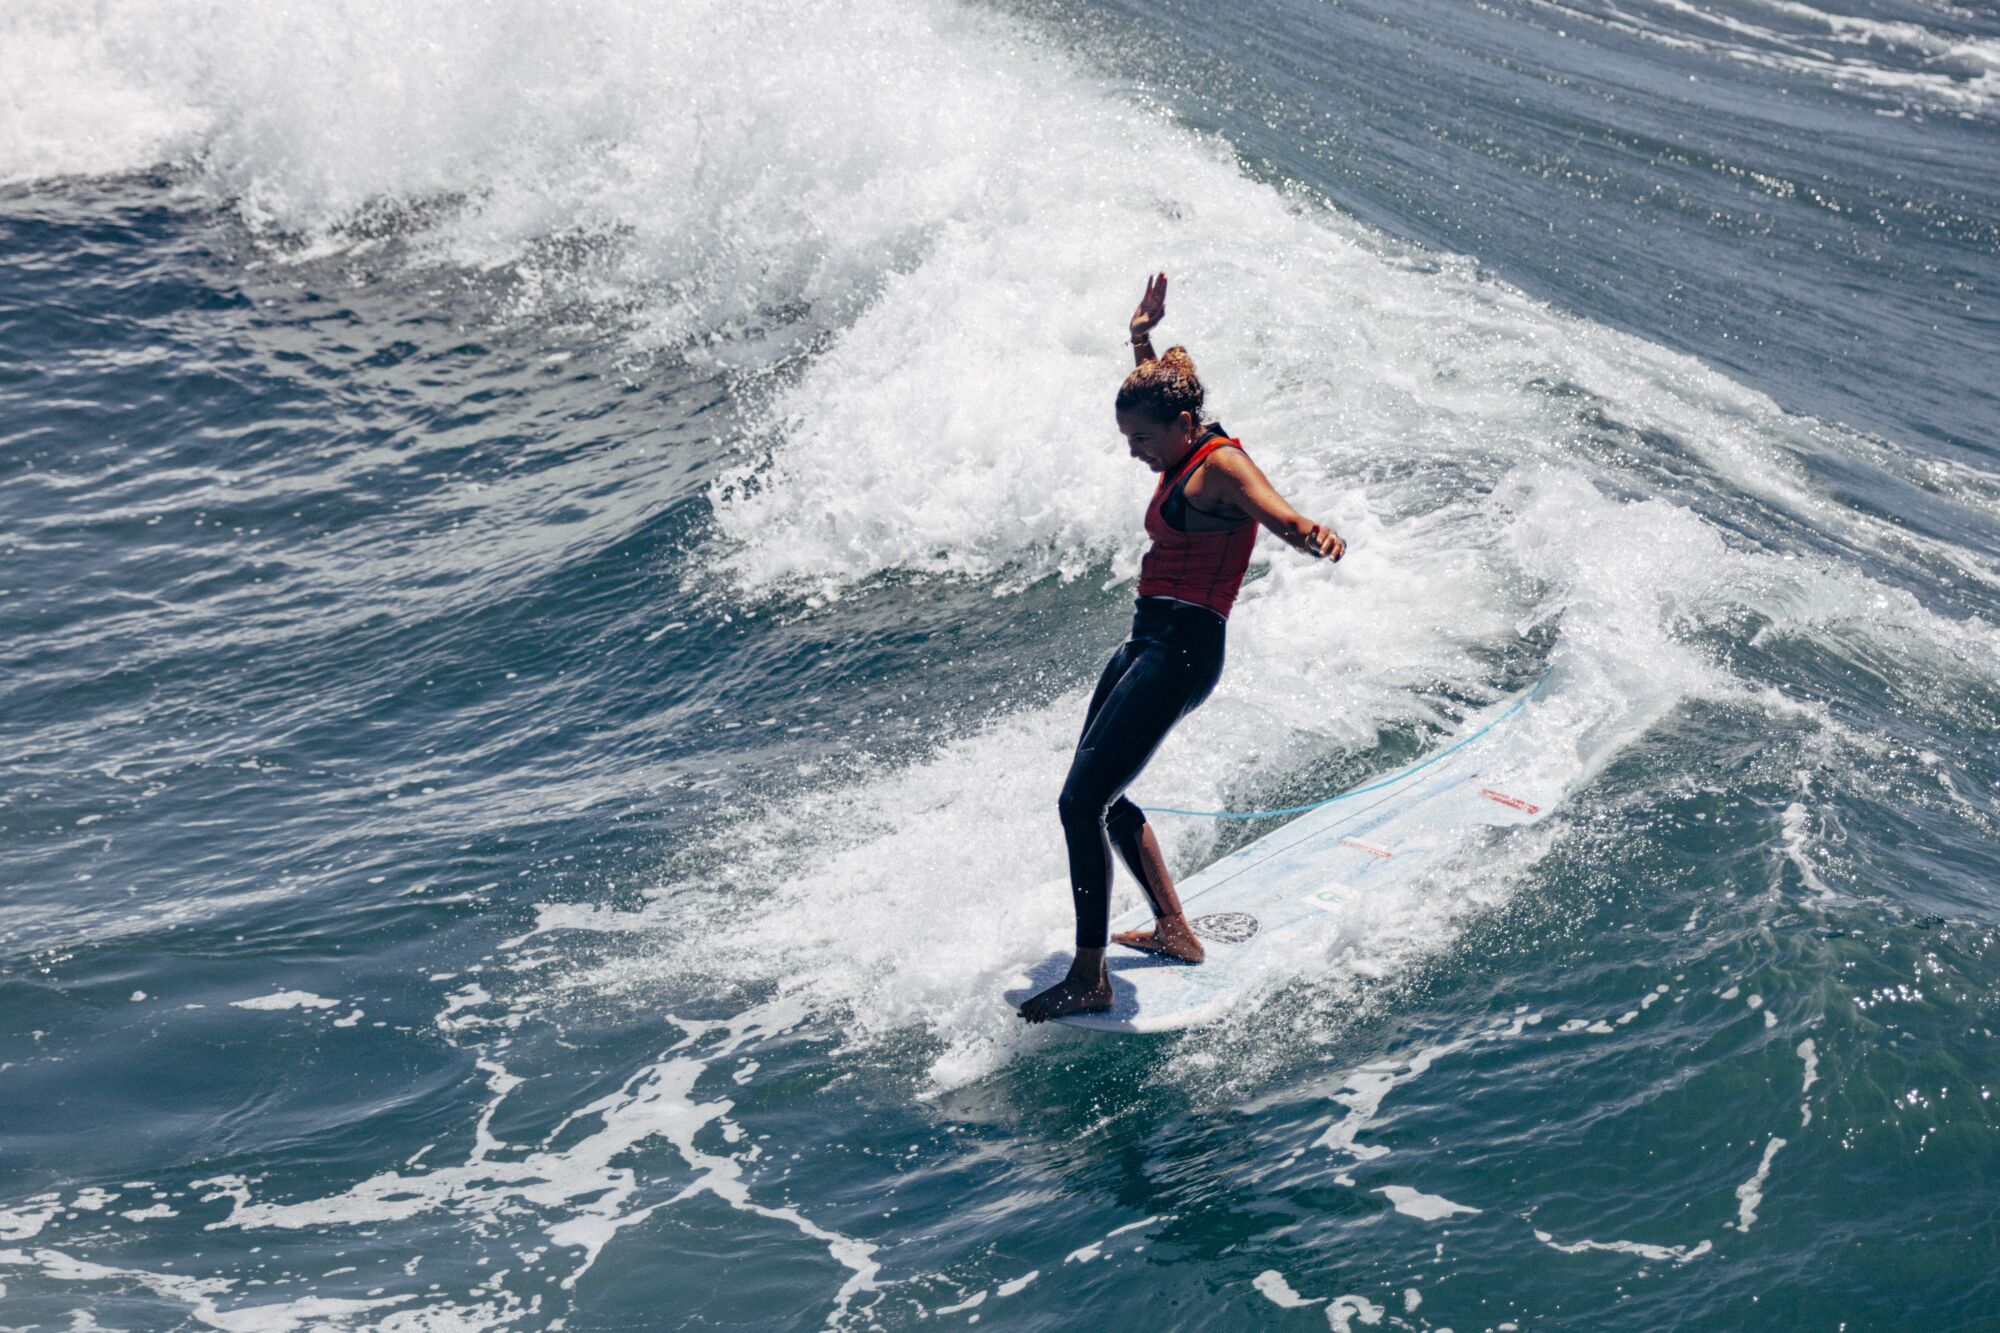 Alice Le Moigne competes in the women's longboard challenger series at the U.S. Open of Surfing.